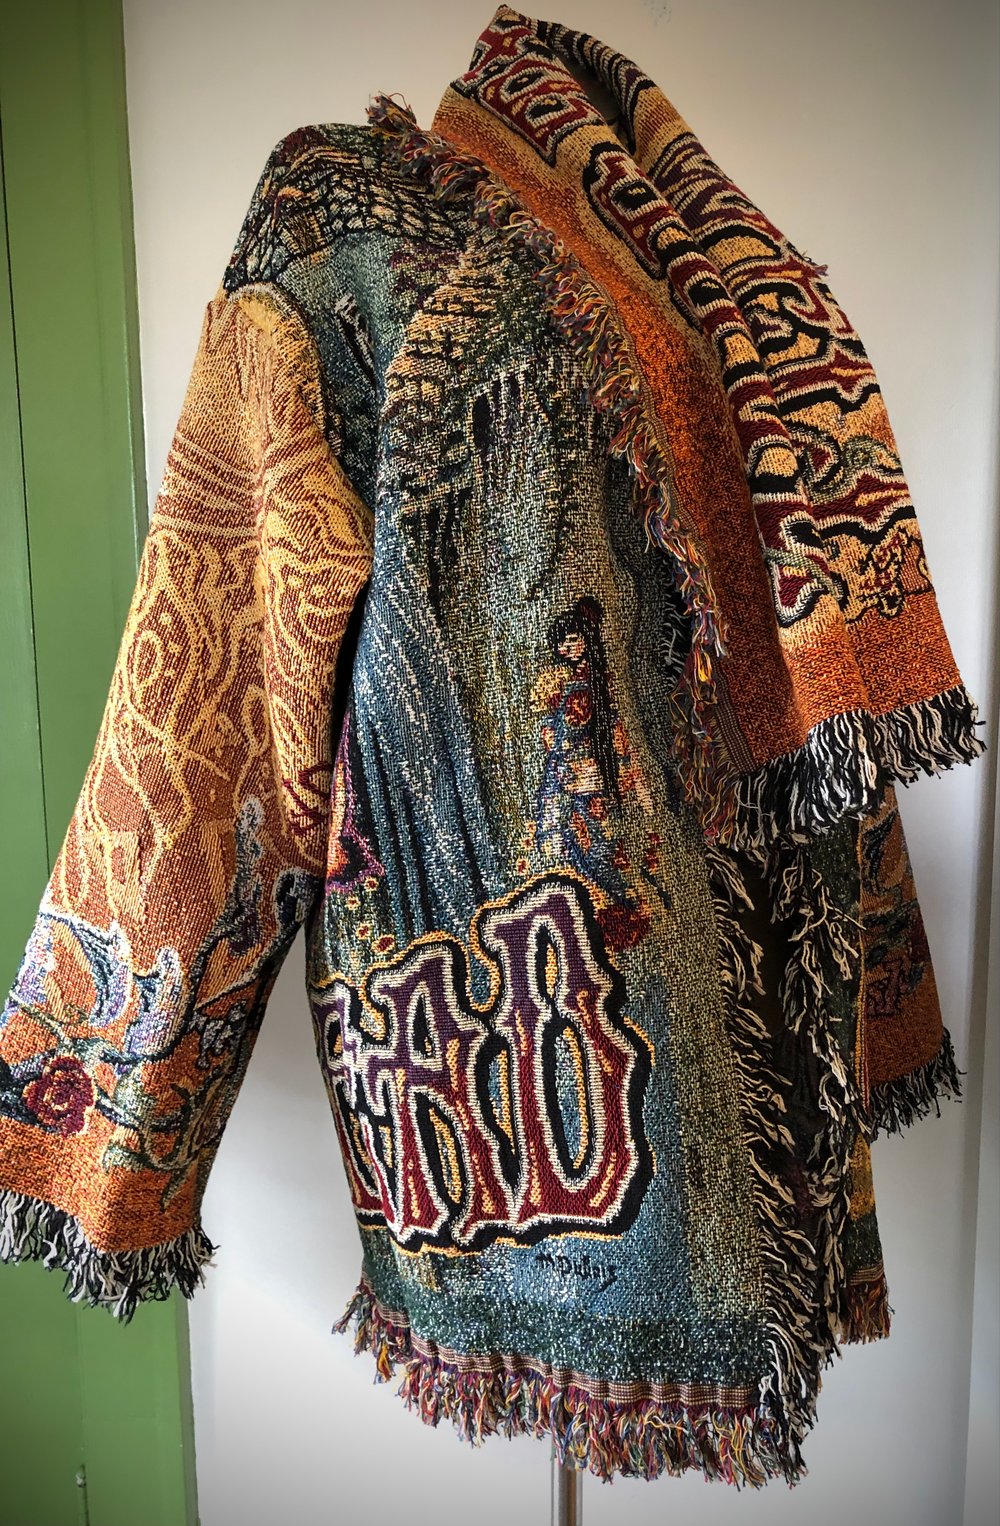 Grateful Dead Fare Thee Well Tour Tapestry jacket